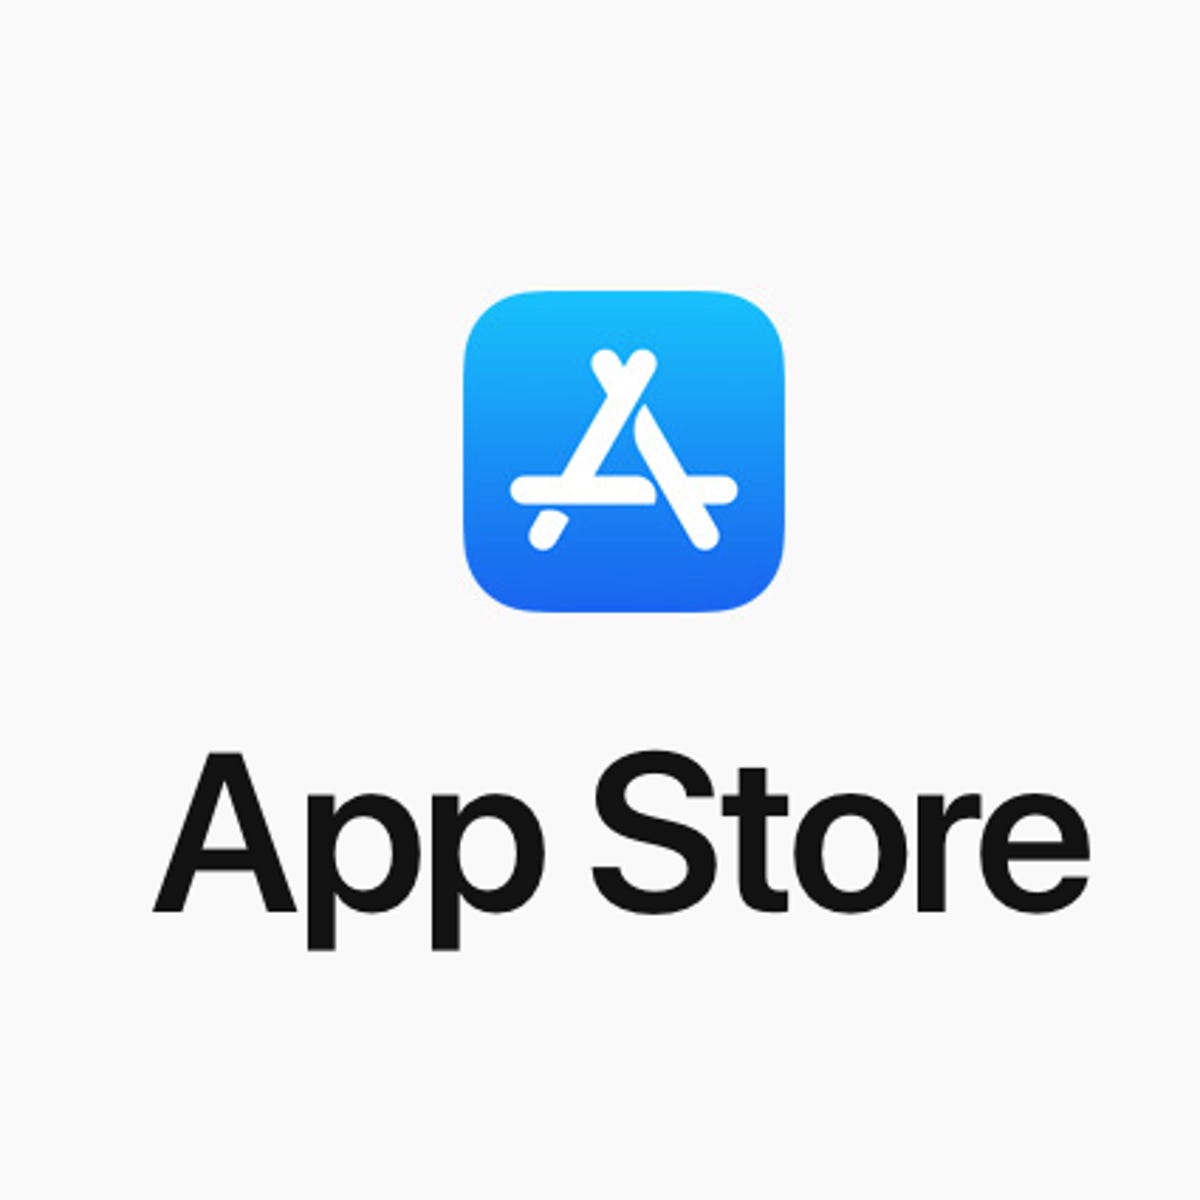 Fleeceware apps discovered on the iOS App Store